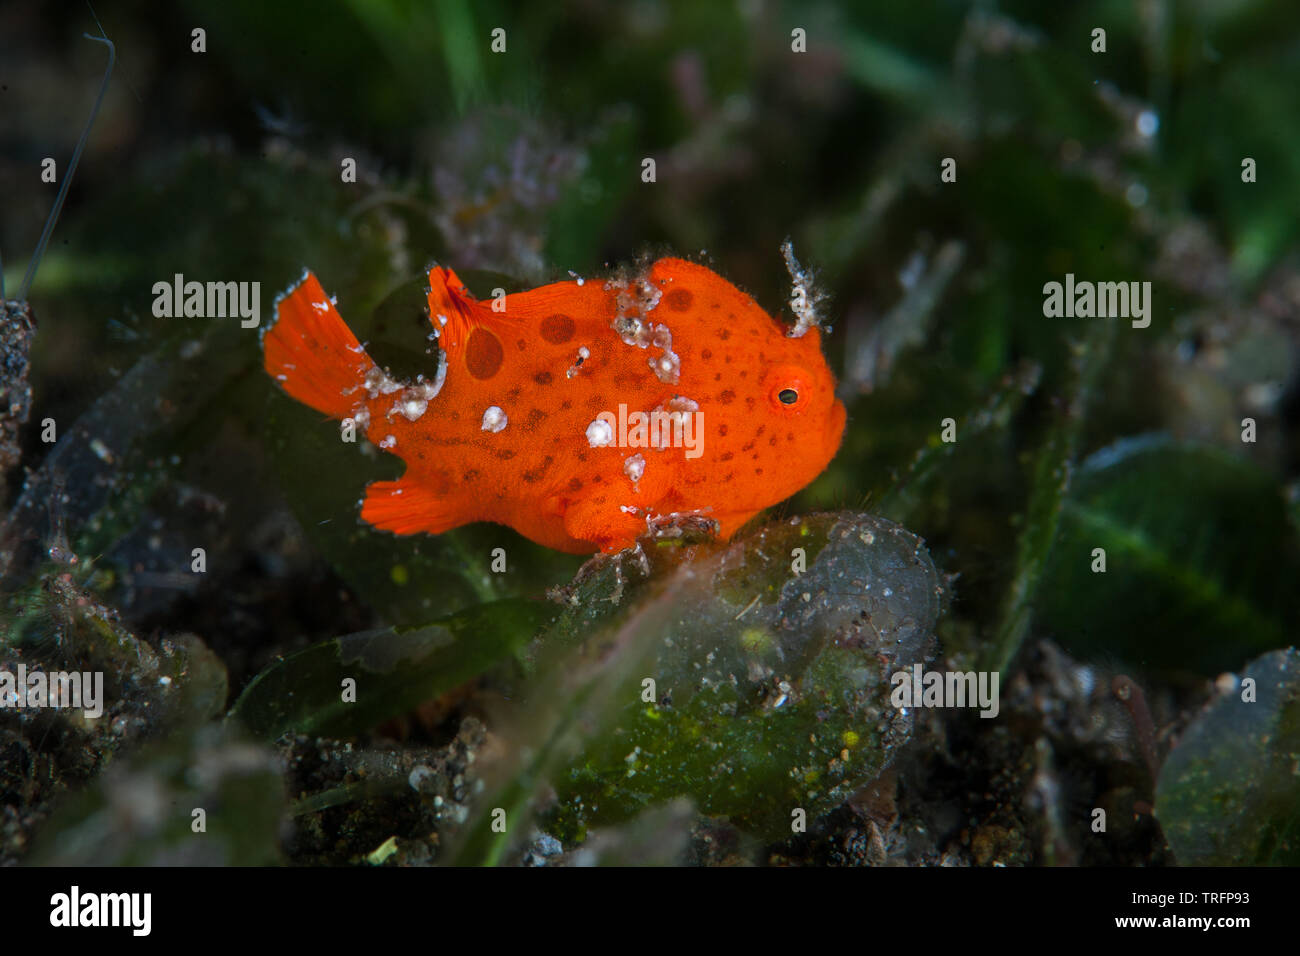 A juvenile Painted frogfish, Antennarius pictus, just 1 cm long, hunts for prey amid seagrass in Indonesia. Frogfish use effective camouflage. Stock Photo